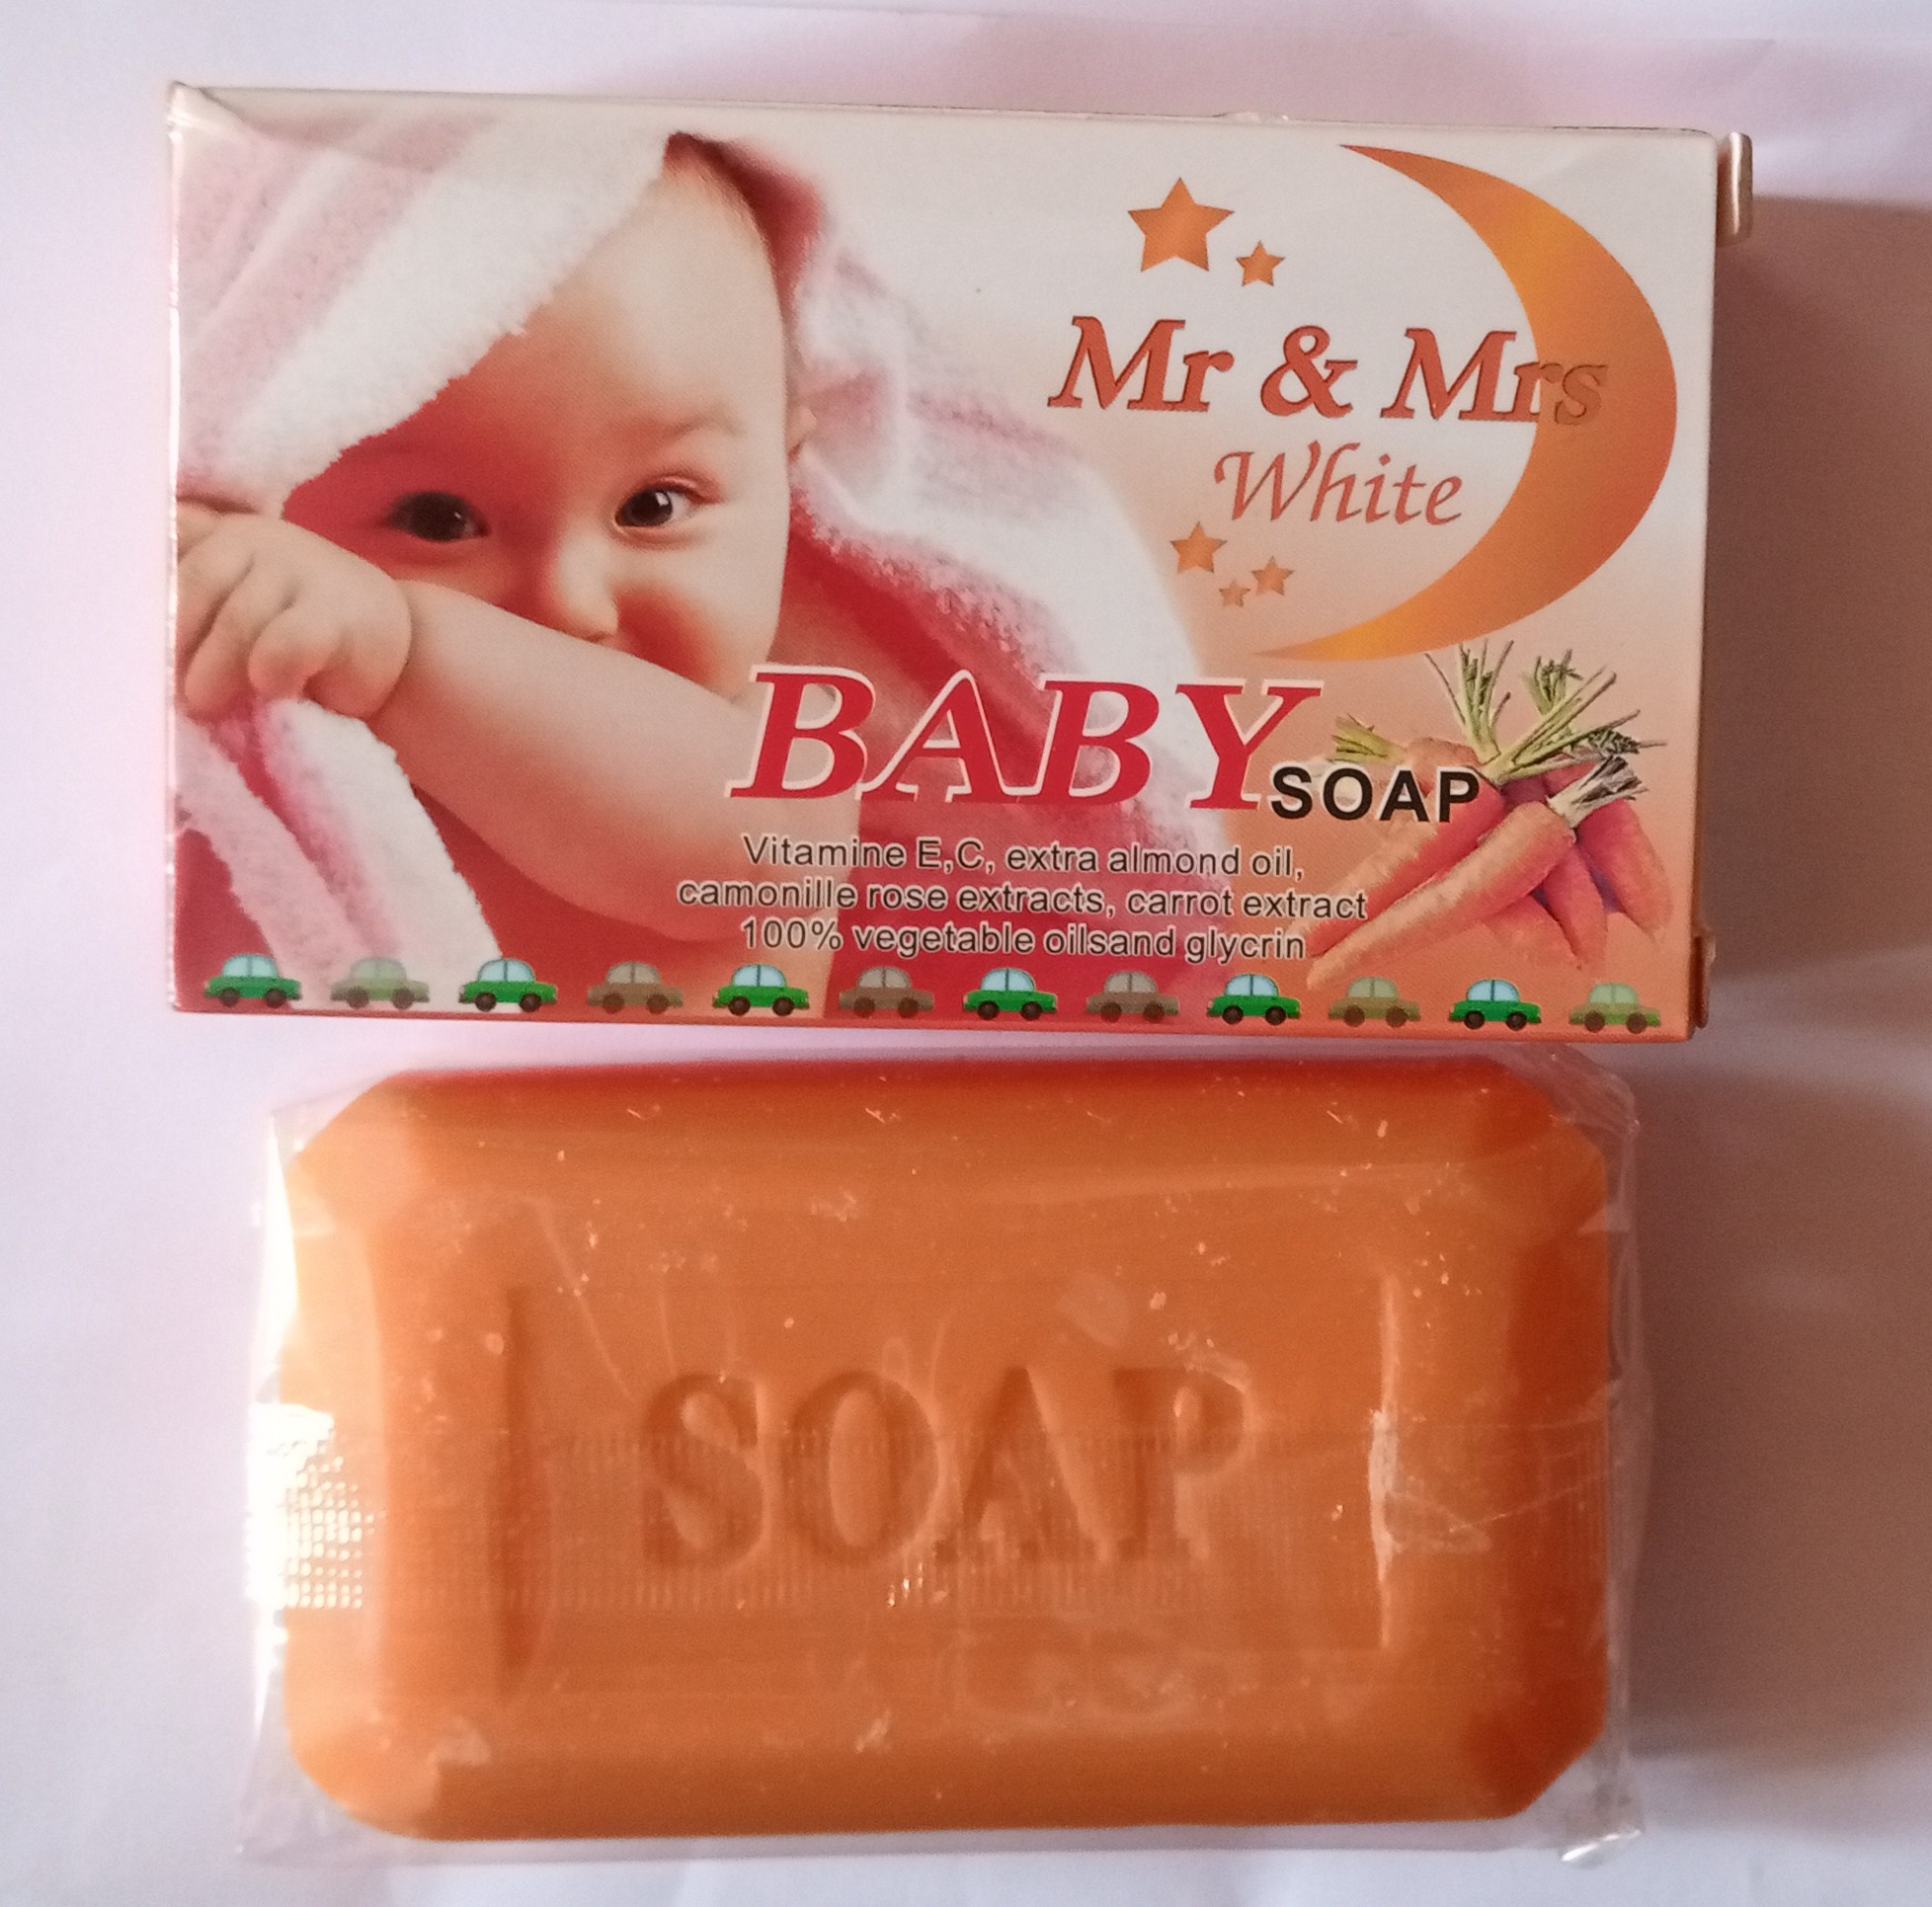 Mr & Mrs White Baby Lotion